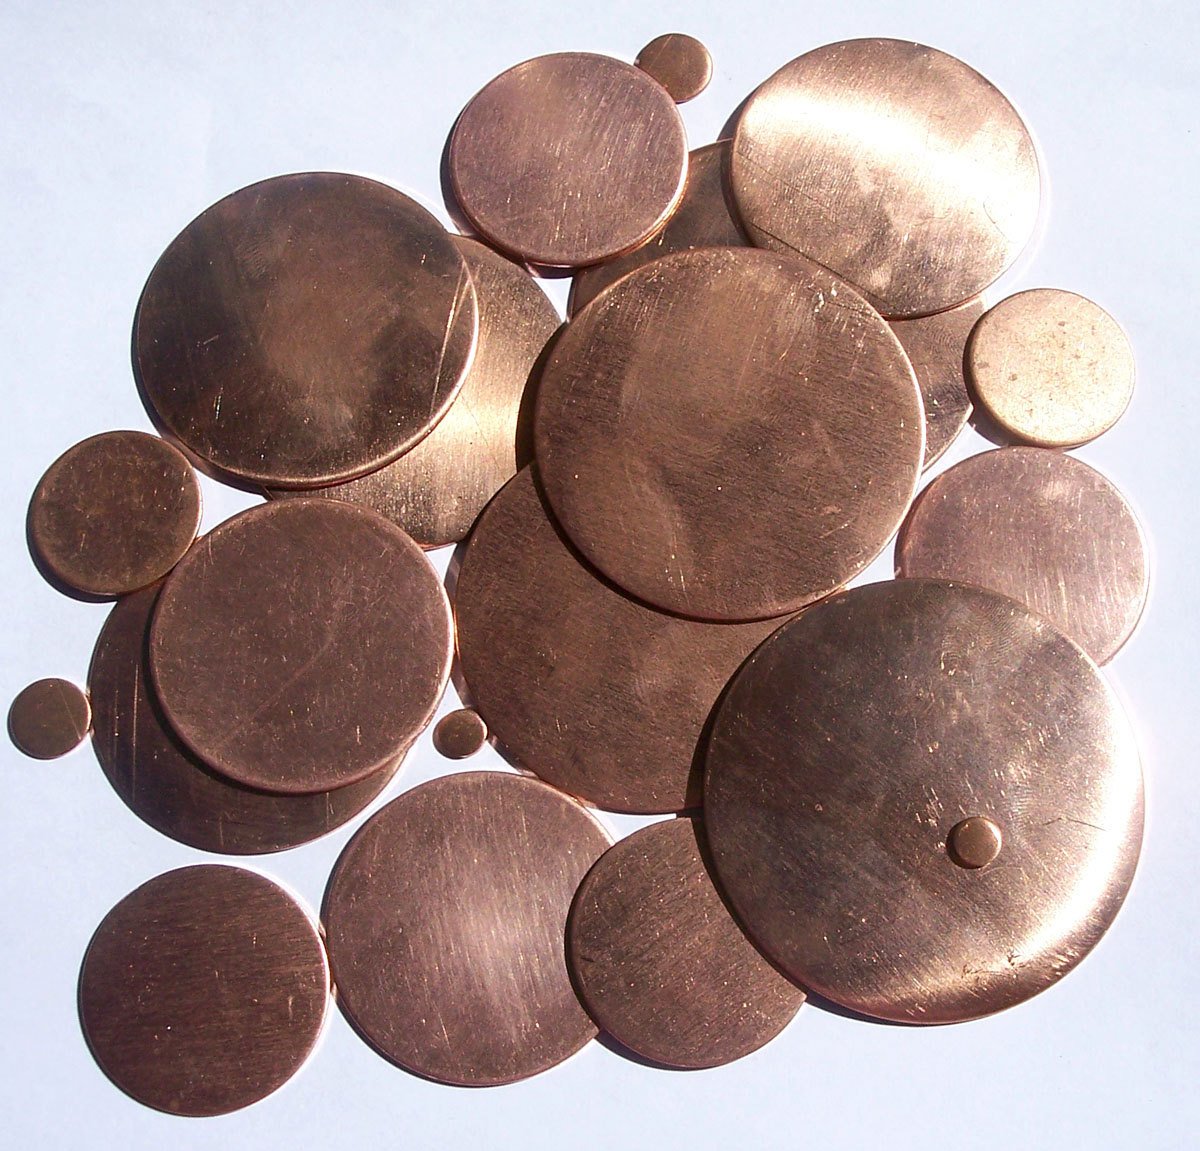 Jewelry Blank Copper Disc 20G 42mm Cutout for Enameling Stamping Texturing, Metal Charm - 3 Pieces